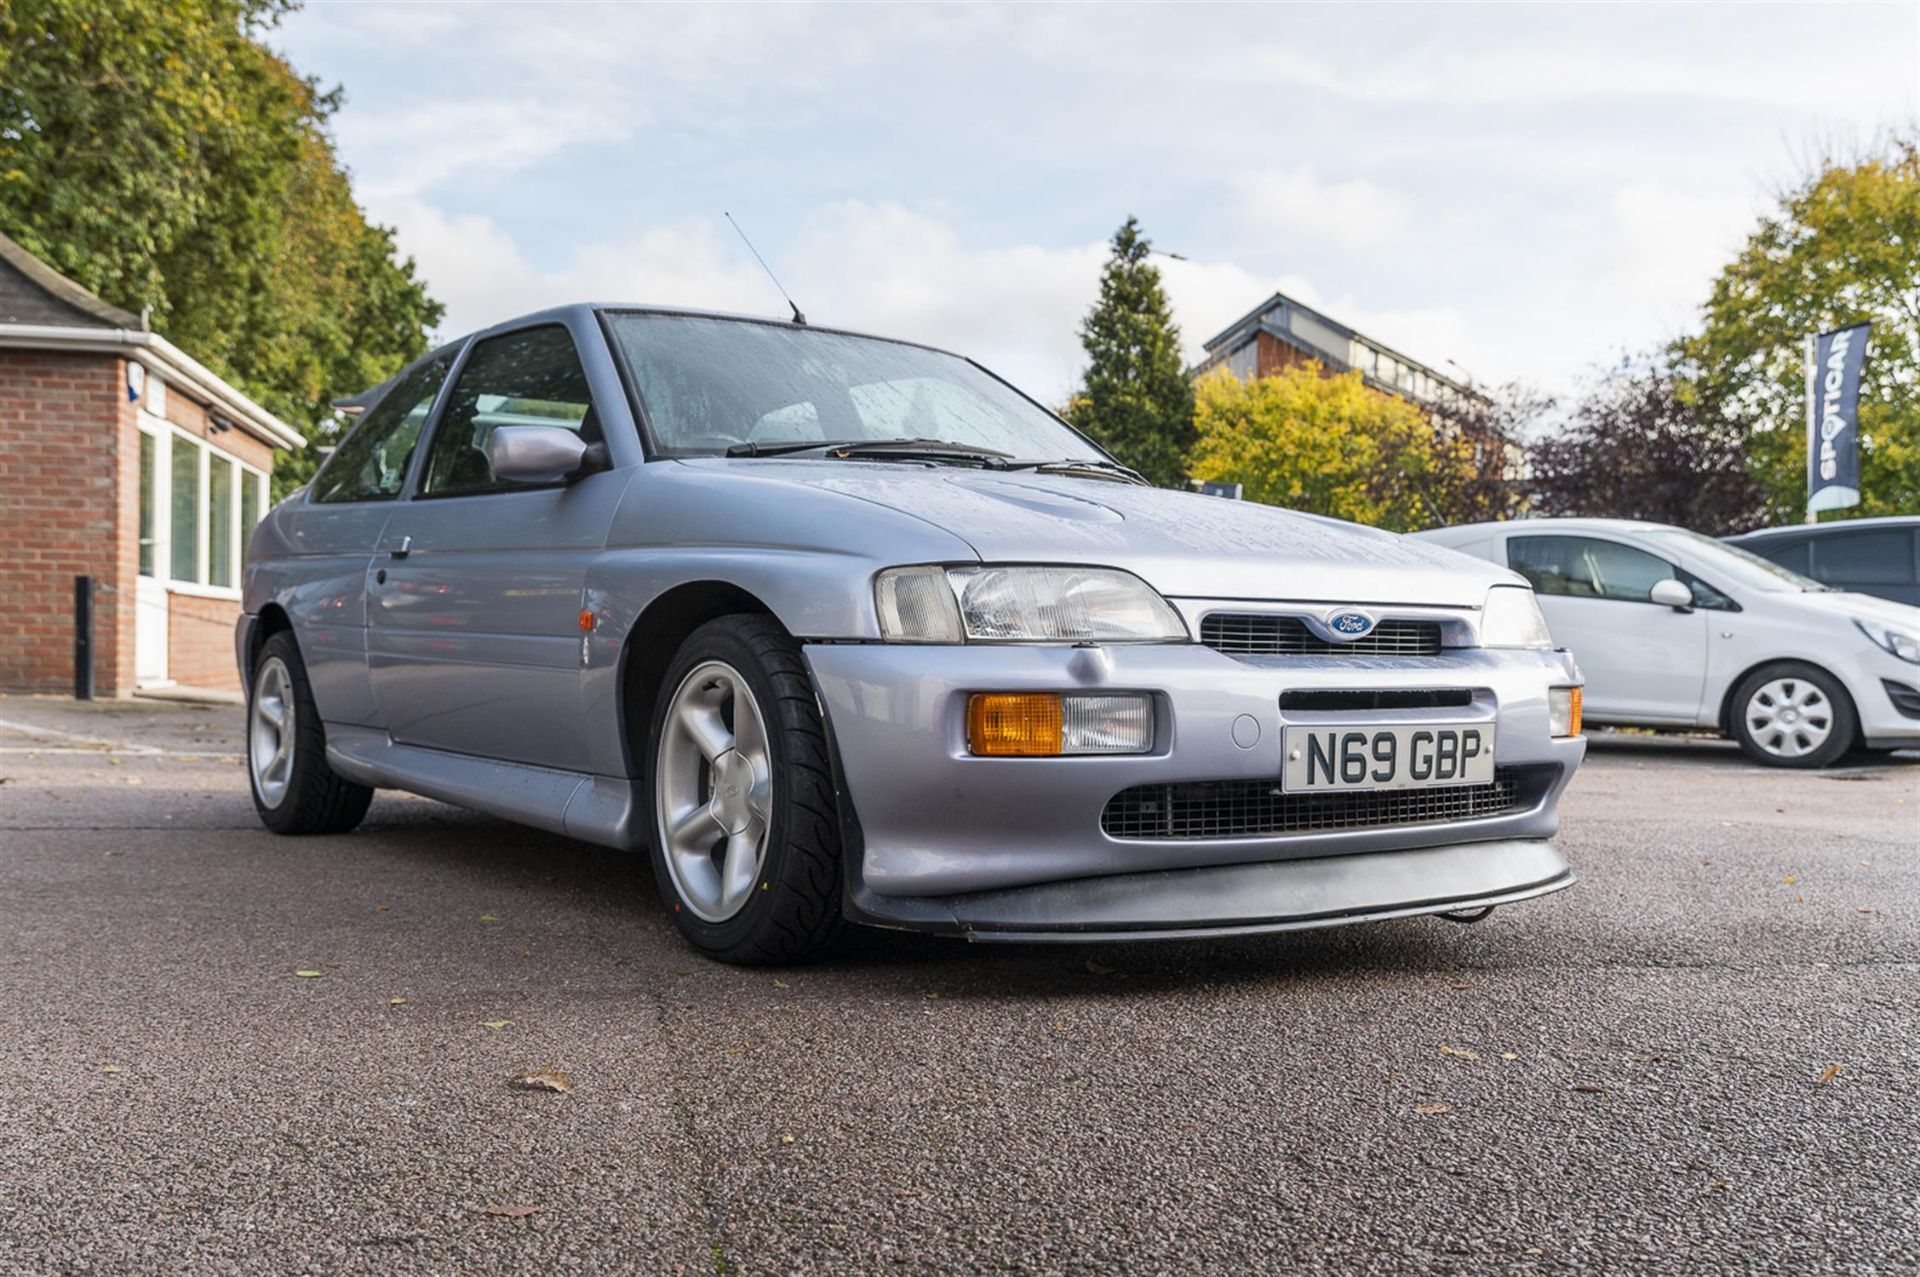 1996 Ford Escort RS Cosworth Lux